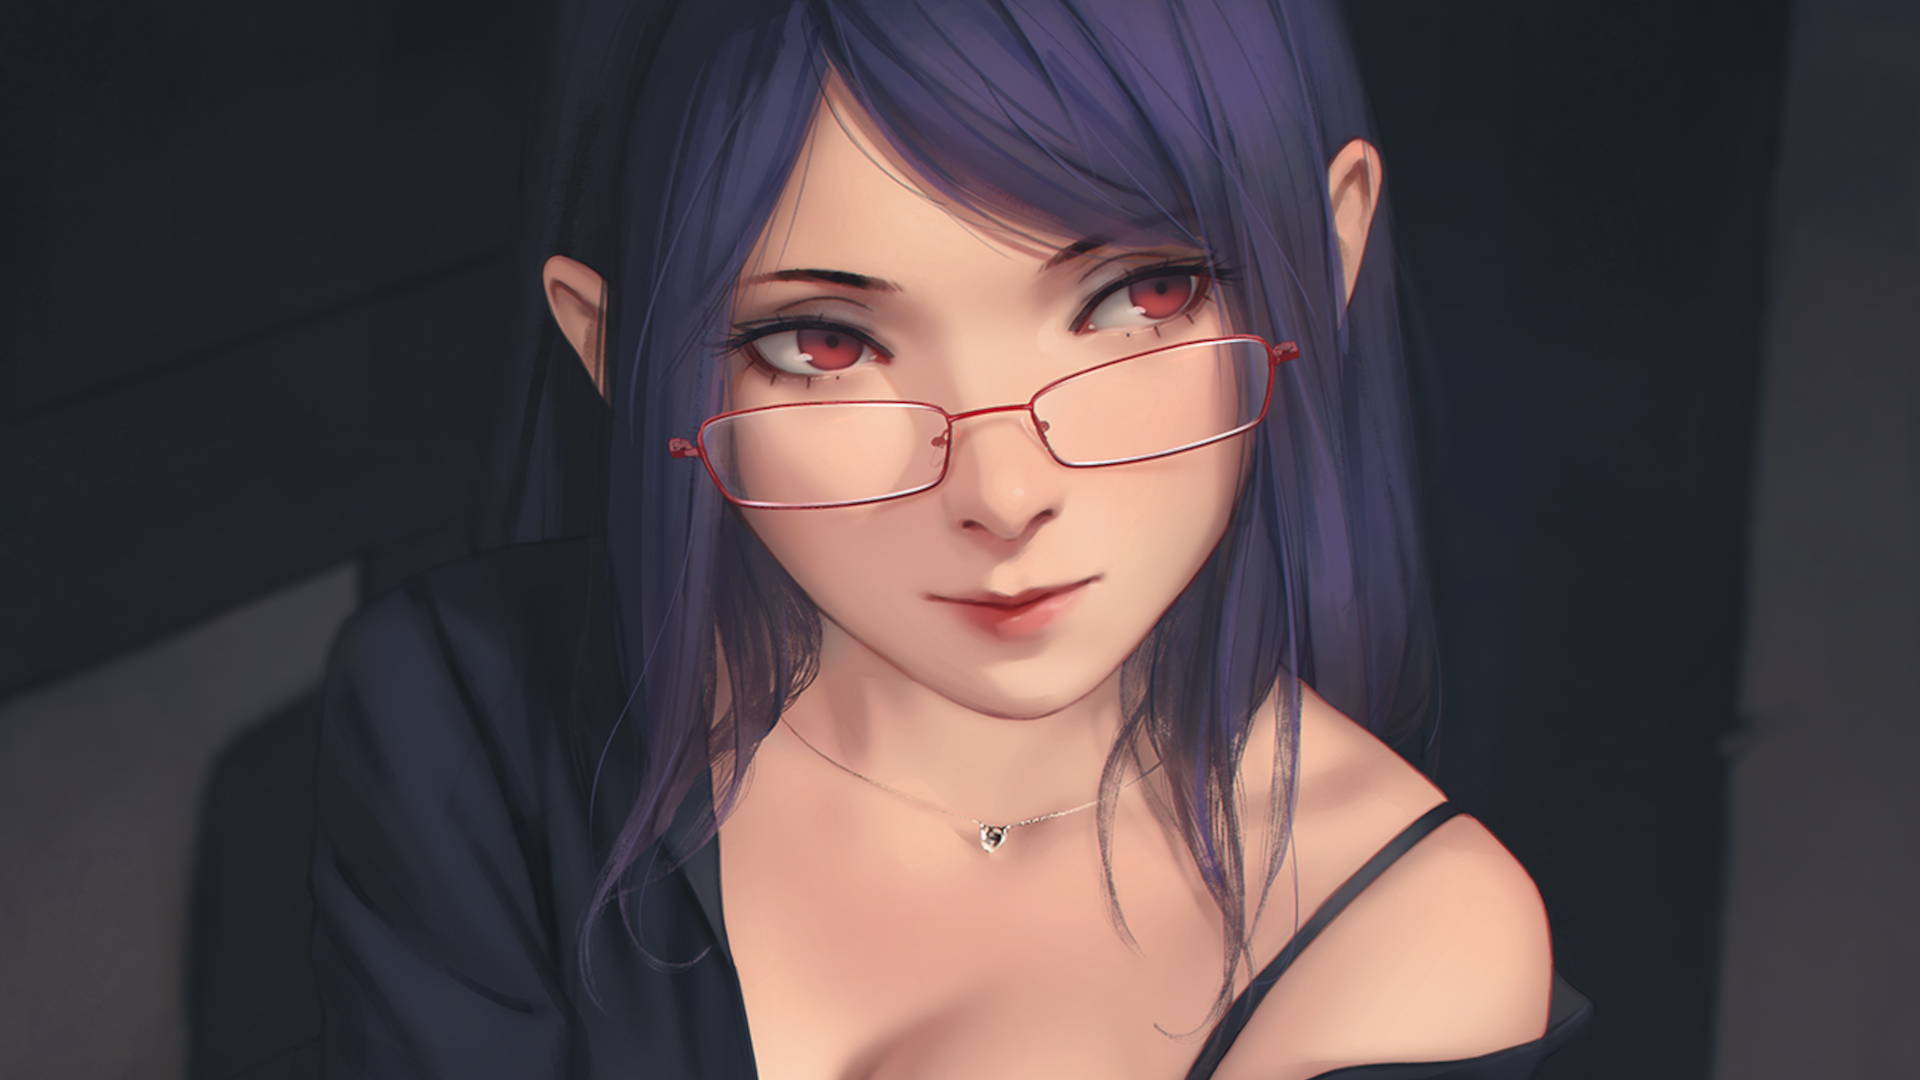 Anime 1920x1080 red eyes purple hair necklace Kamishiro Rize anime women with glasses Tokyo Ghoul anime girls cropped artwork Miura Naoko